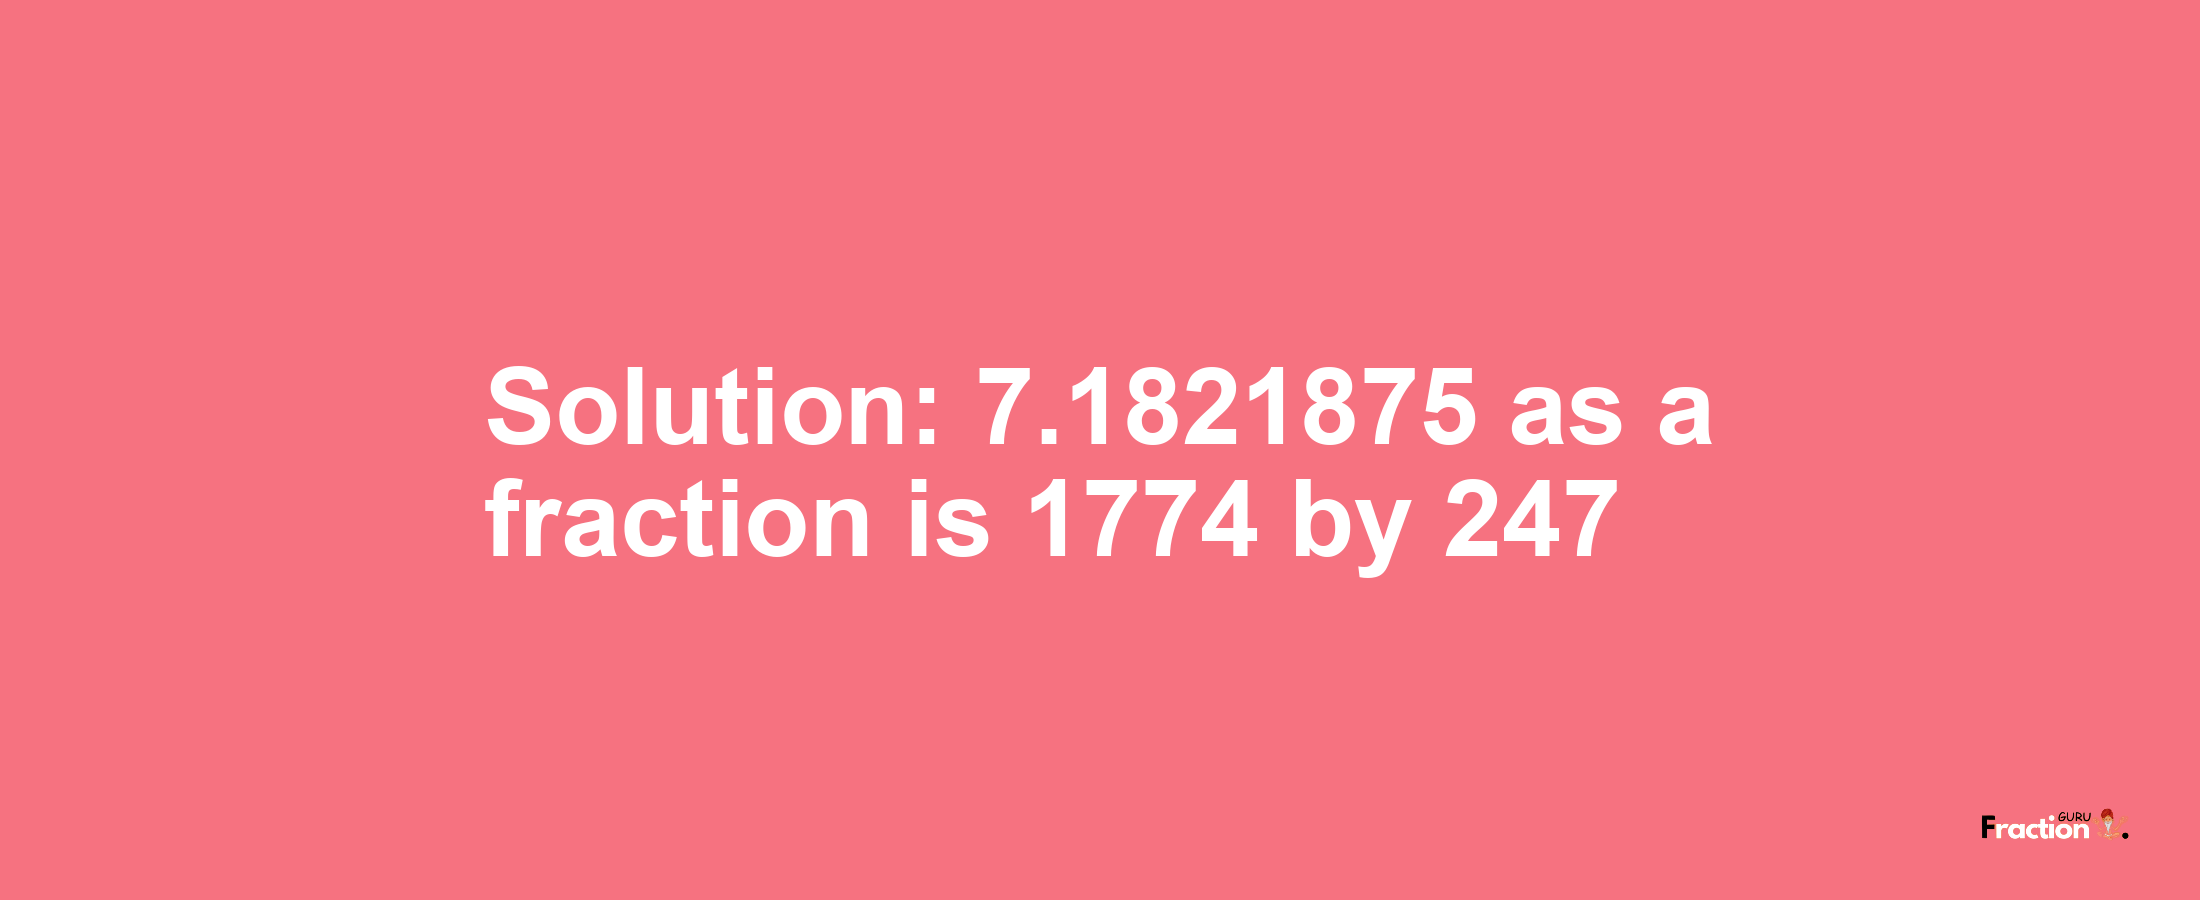 Solution:7.1821875 as a fraction is 1774/247